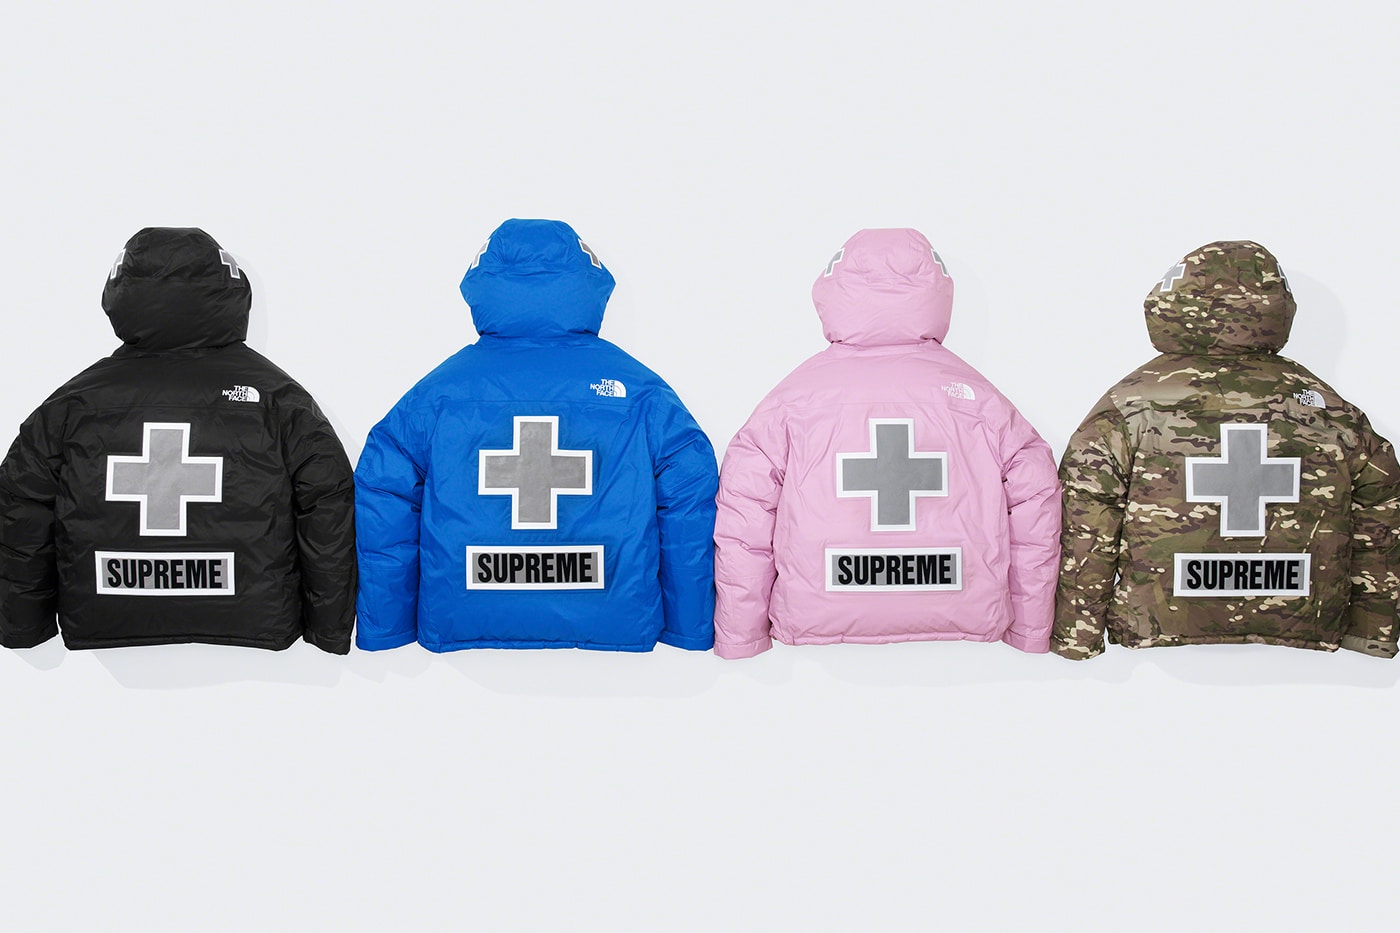 Supreme x The North Face Spring 2022